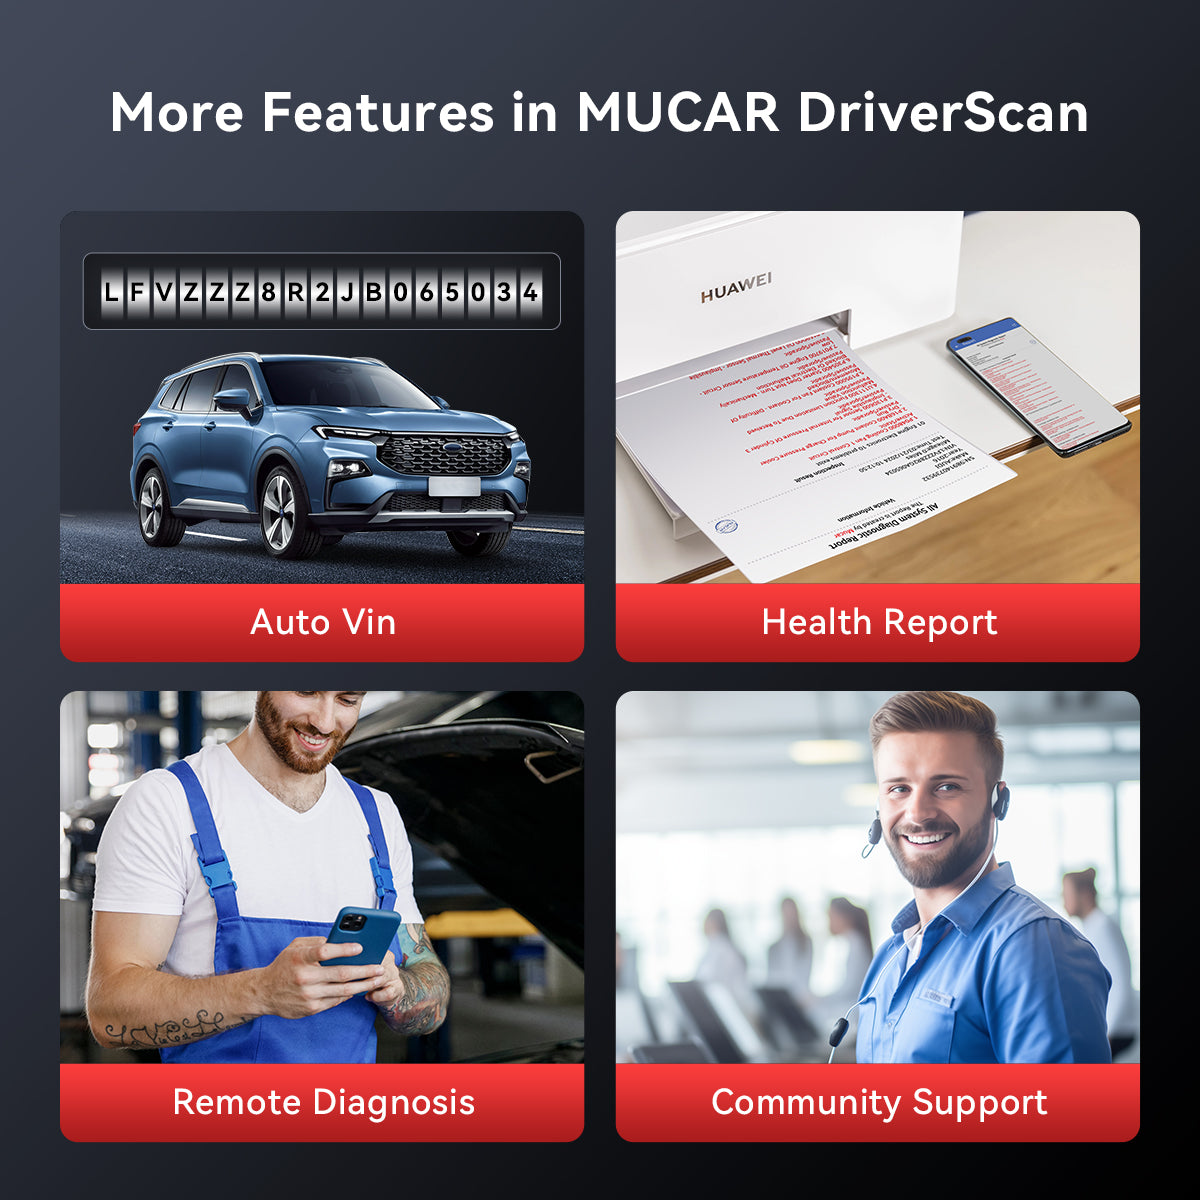 More Features in MUCAR DriverScan